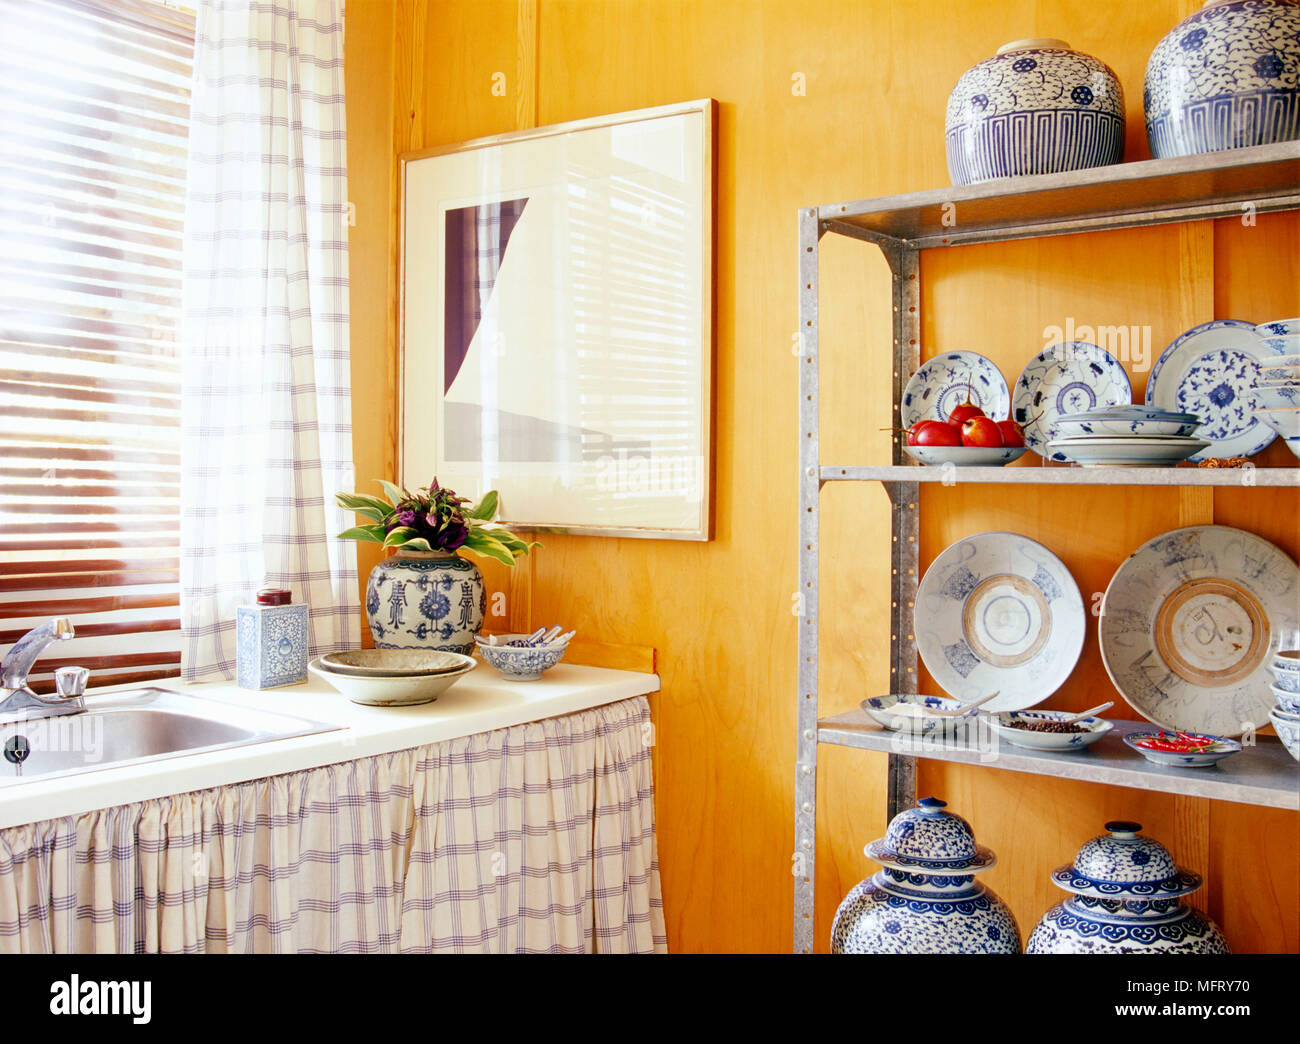 A detail of a modern yellow kitchen showing a sink unit with curtain metal shelving unit with a display of oriental ceramics; Stock Photo